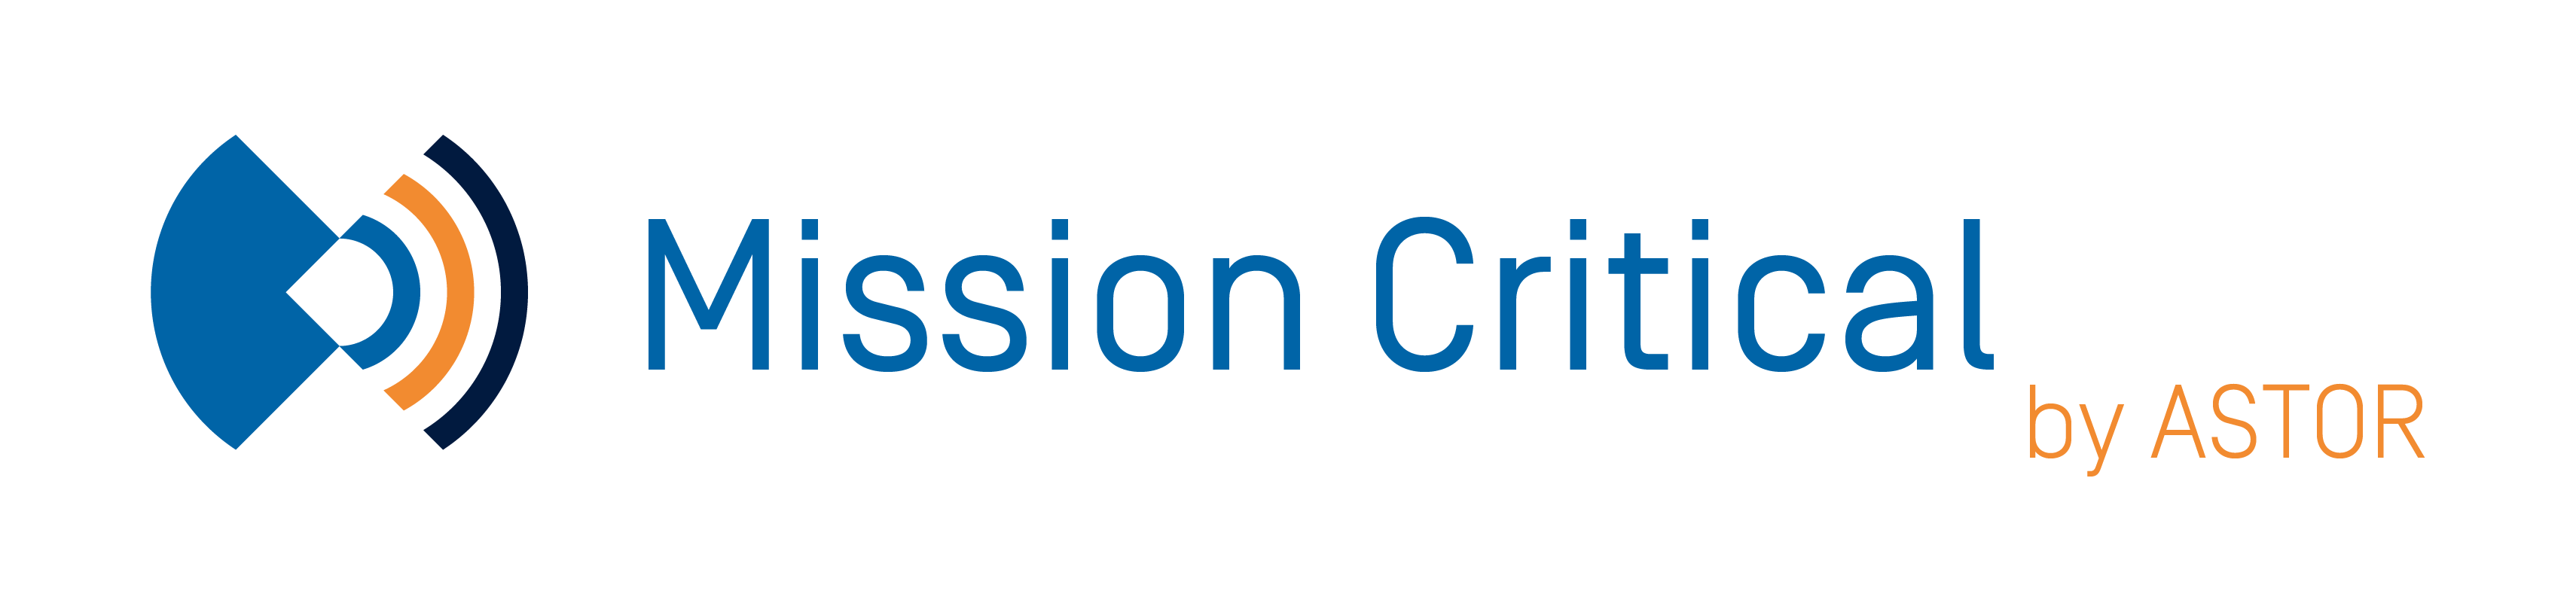 Astor Mission Critical is a value-added distributor within Industrial Internet of Things (IIoT) data exchange platforms and Machine to Machine (M2M). Established in 2017 as a subsidiary of ASTOR, which has over 25 years, helping customers increase productivity and competitiveness, Mission Critical specializes in wireless technologies. They support the ideas of Industry 4.0 and present a spectrum of solutions that allow for quickly adapting to the new business reality of mission-critical connectivity using all types of radio communications.

